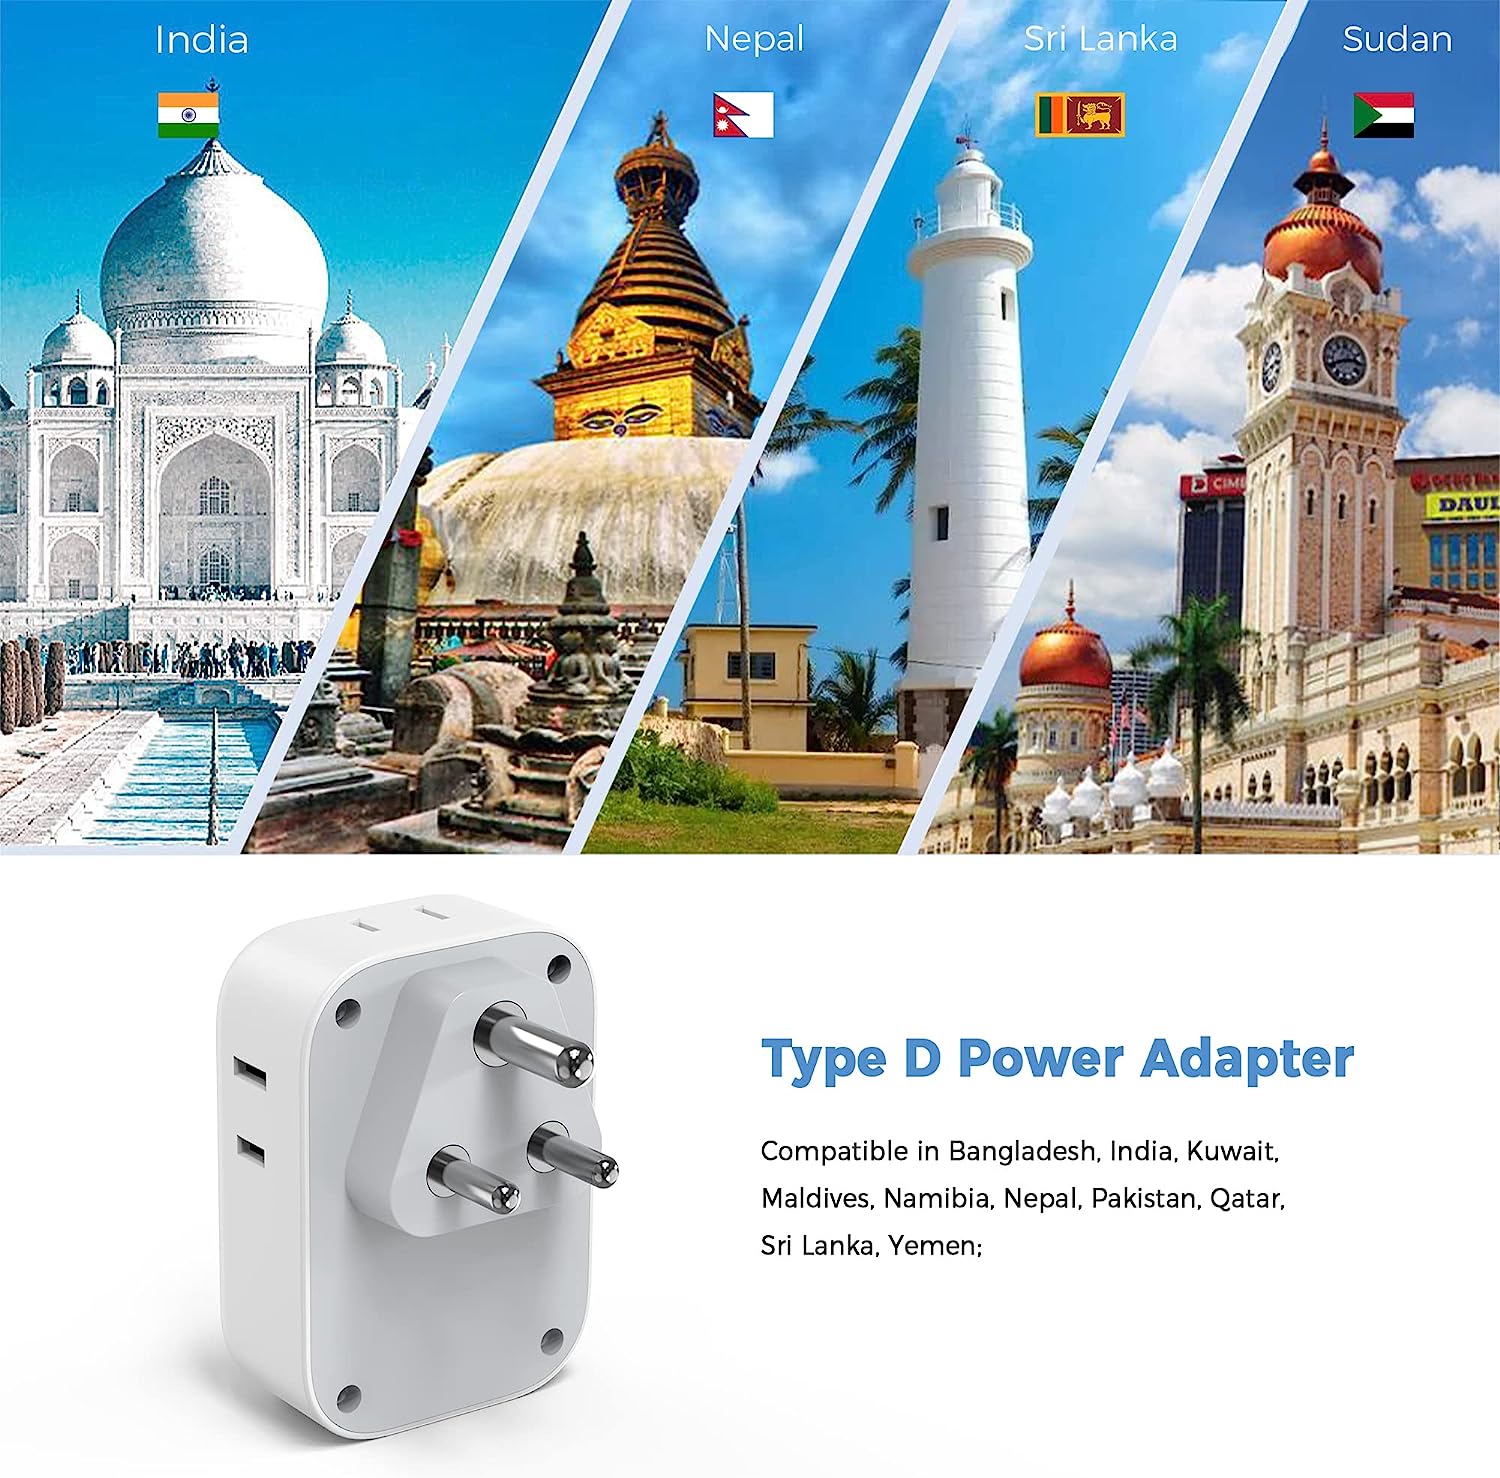 TESSAN India Power Adapter with 4 American Outlets 3 USB Charger (1 USB C Port)